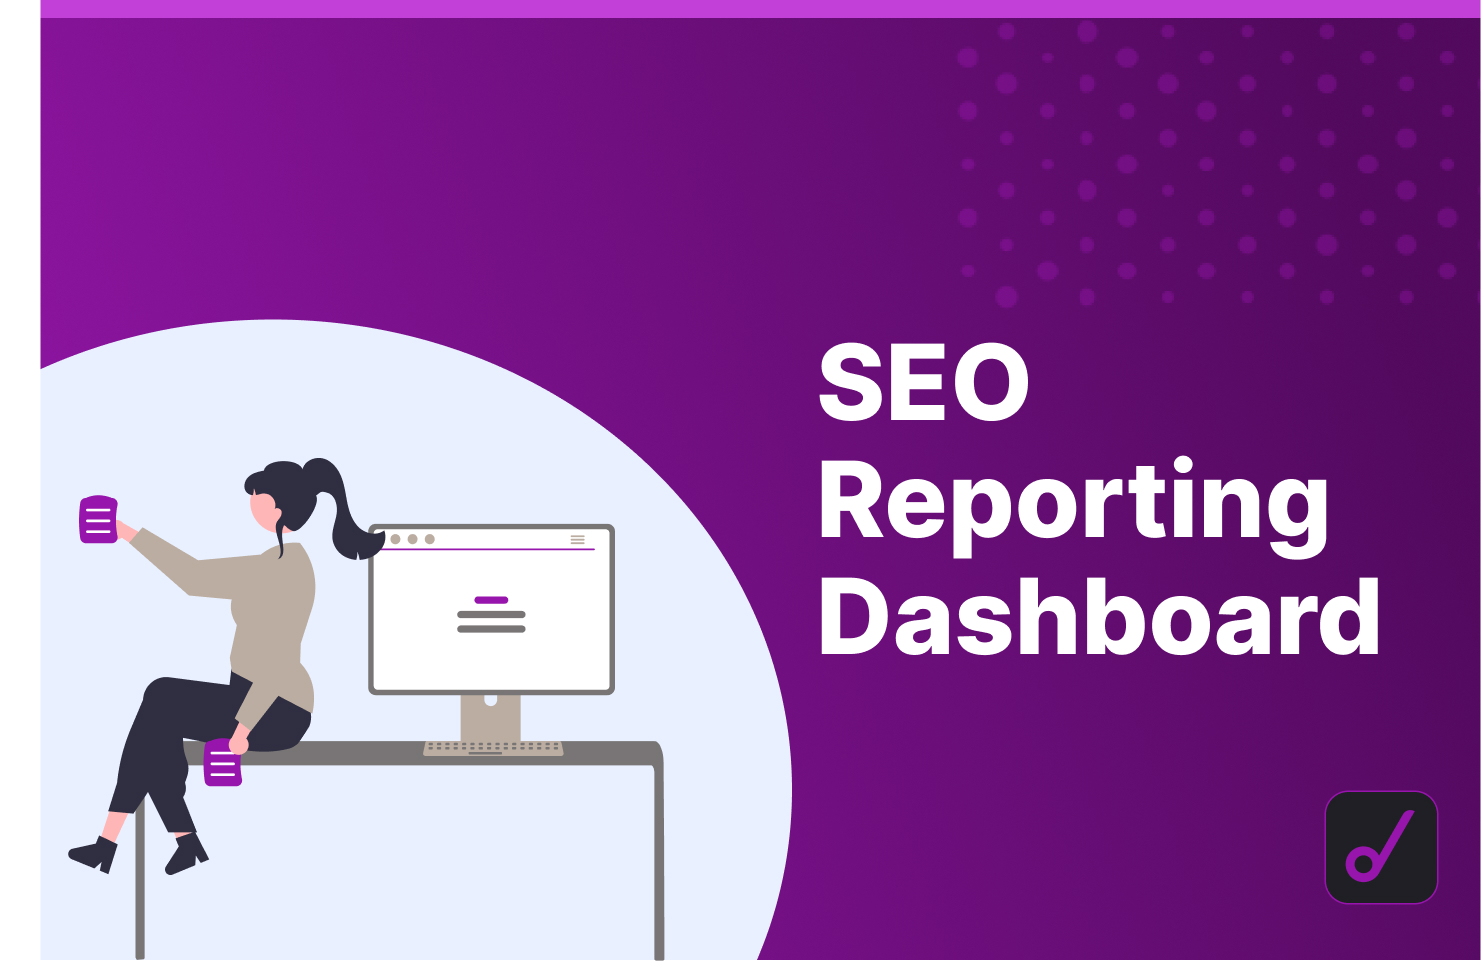 Here’s What You Need in an SEO Dashboard